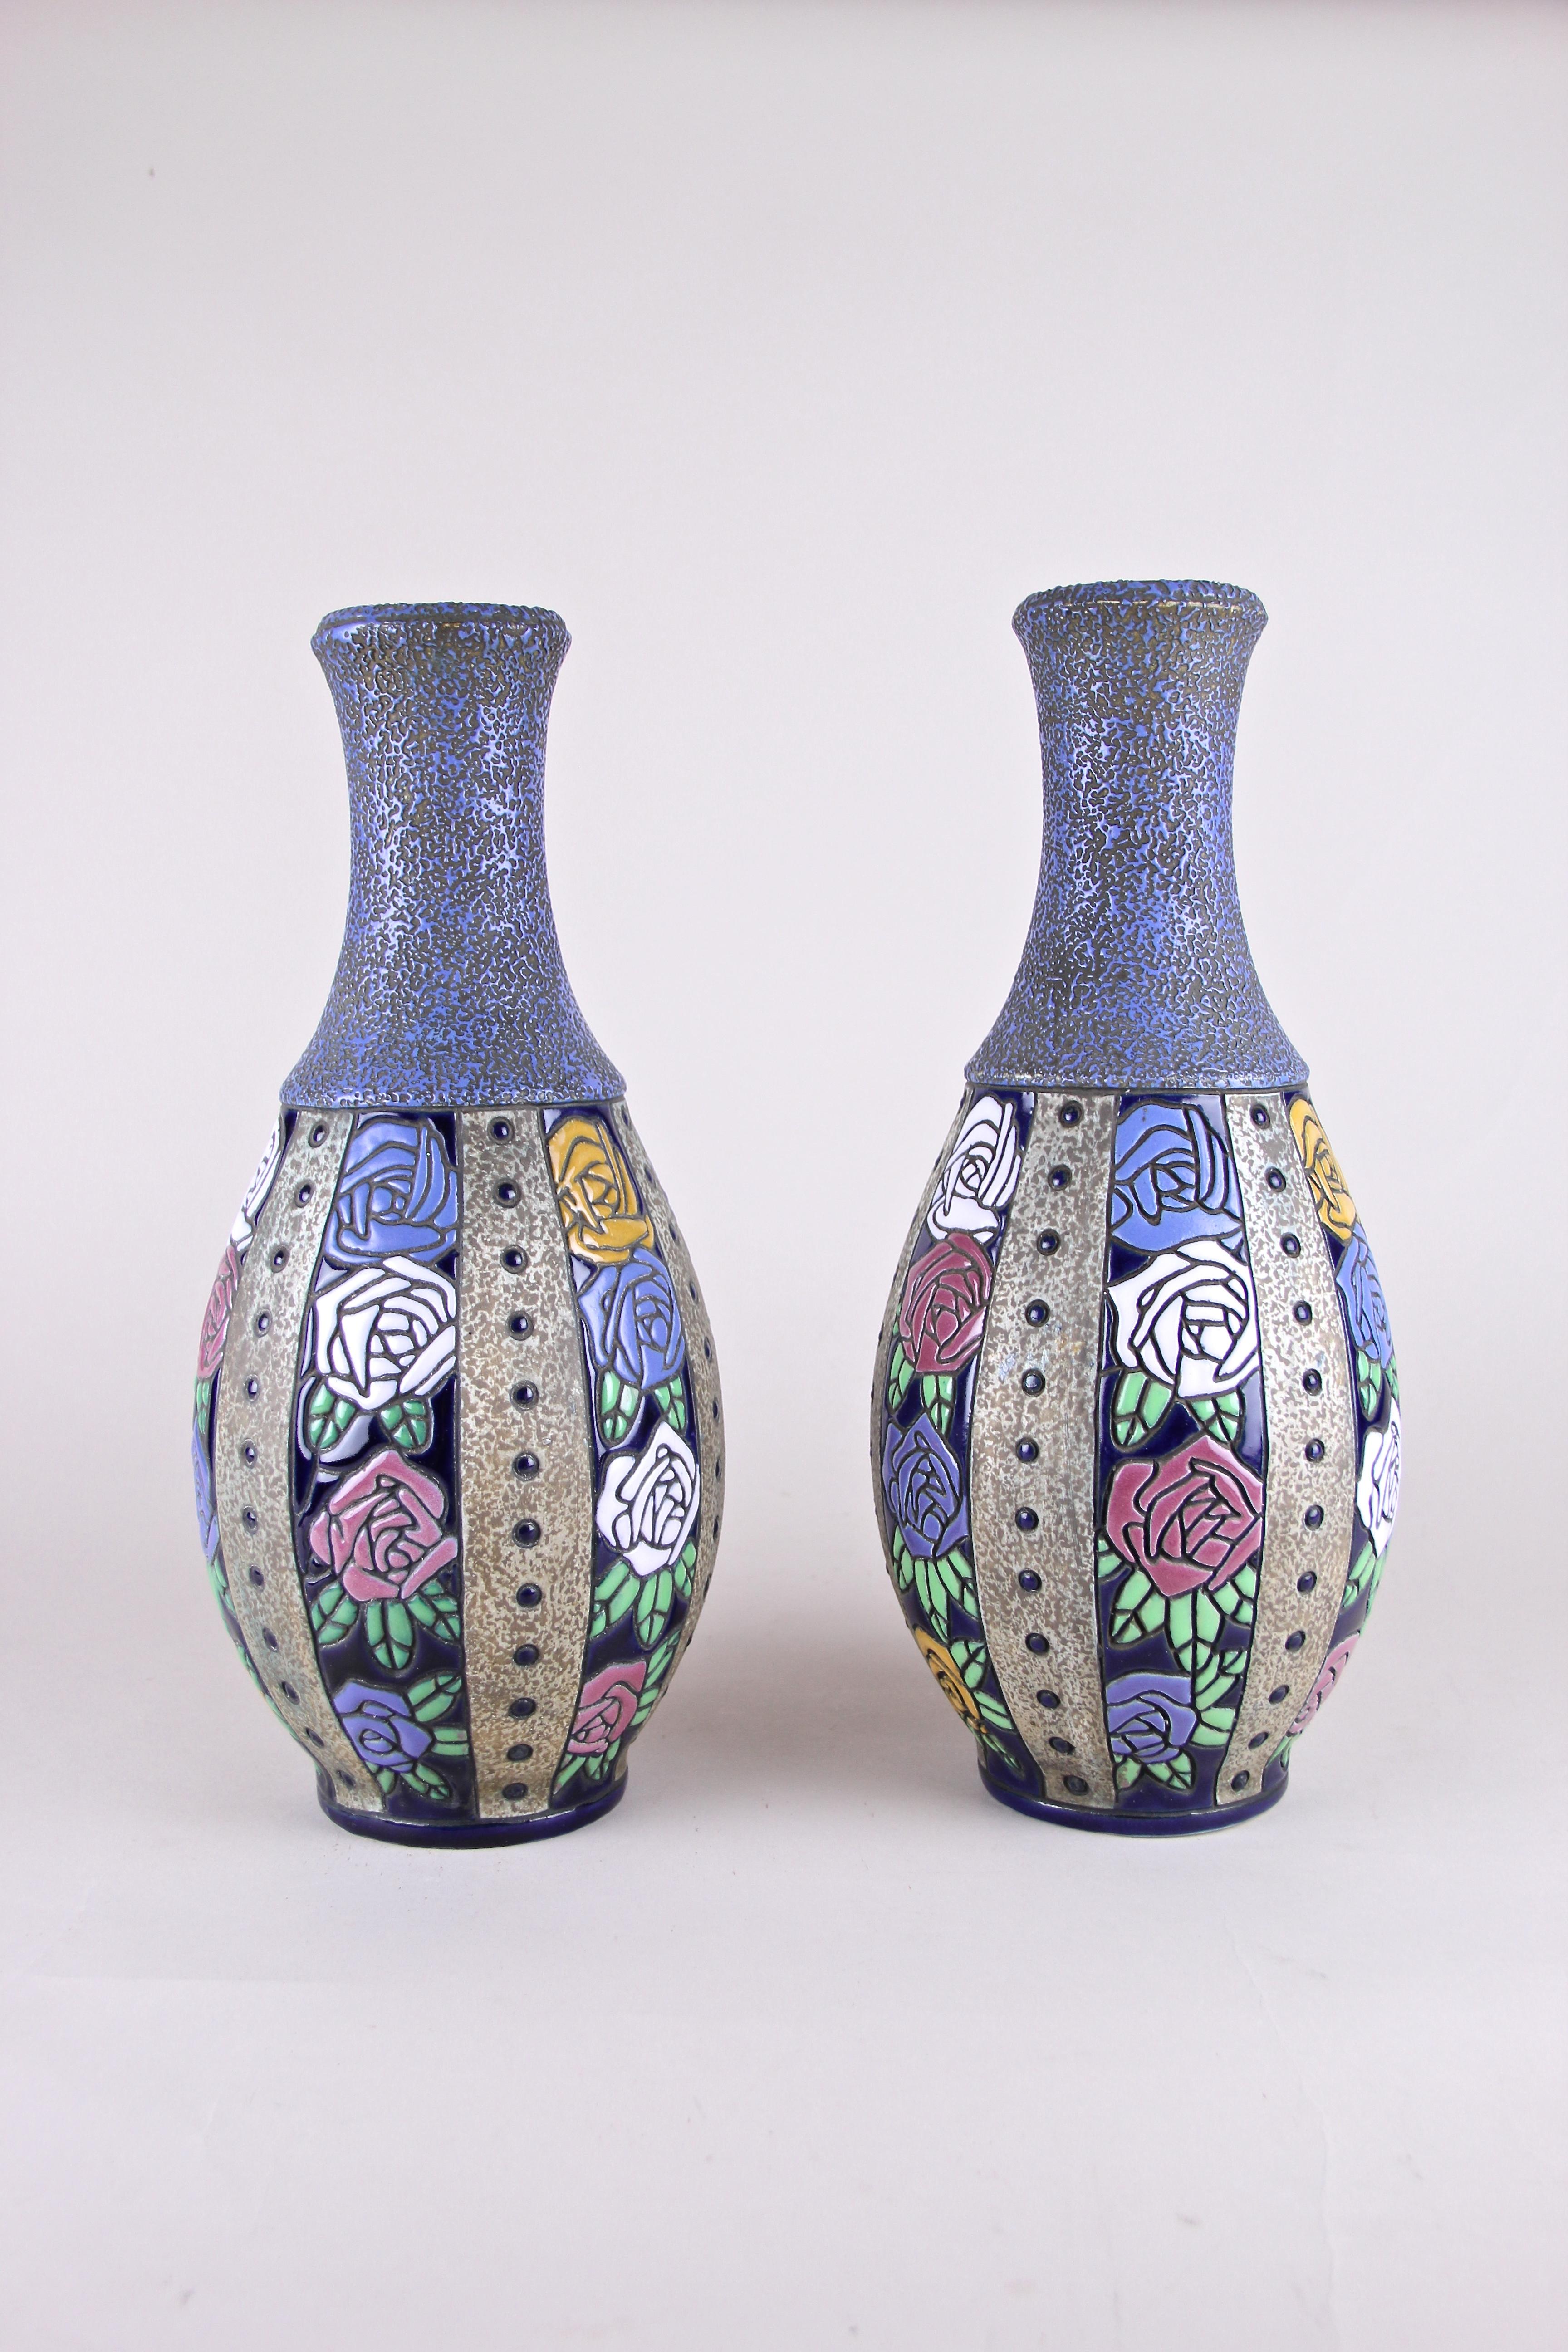 Beautiful pair of Art Nouveau vases by Amphora Czechoslovakia, circa 1915. This great designed vases show a unique design with colorful roses in pink, white, yellow and blue, mixed and splitted in fields of four around the bulbous bodies. The vases